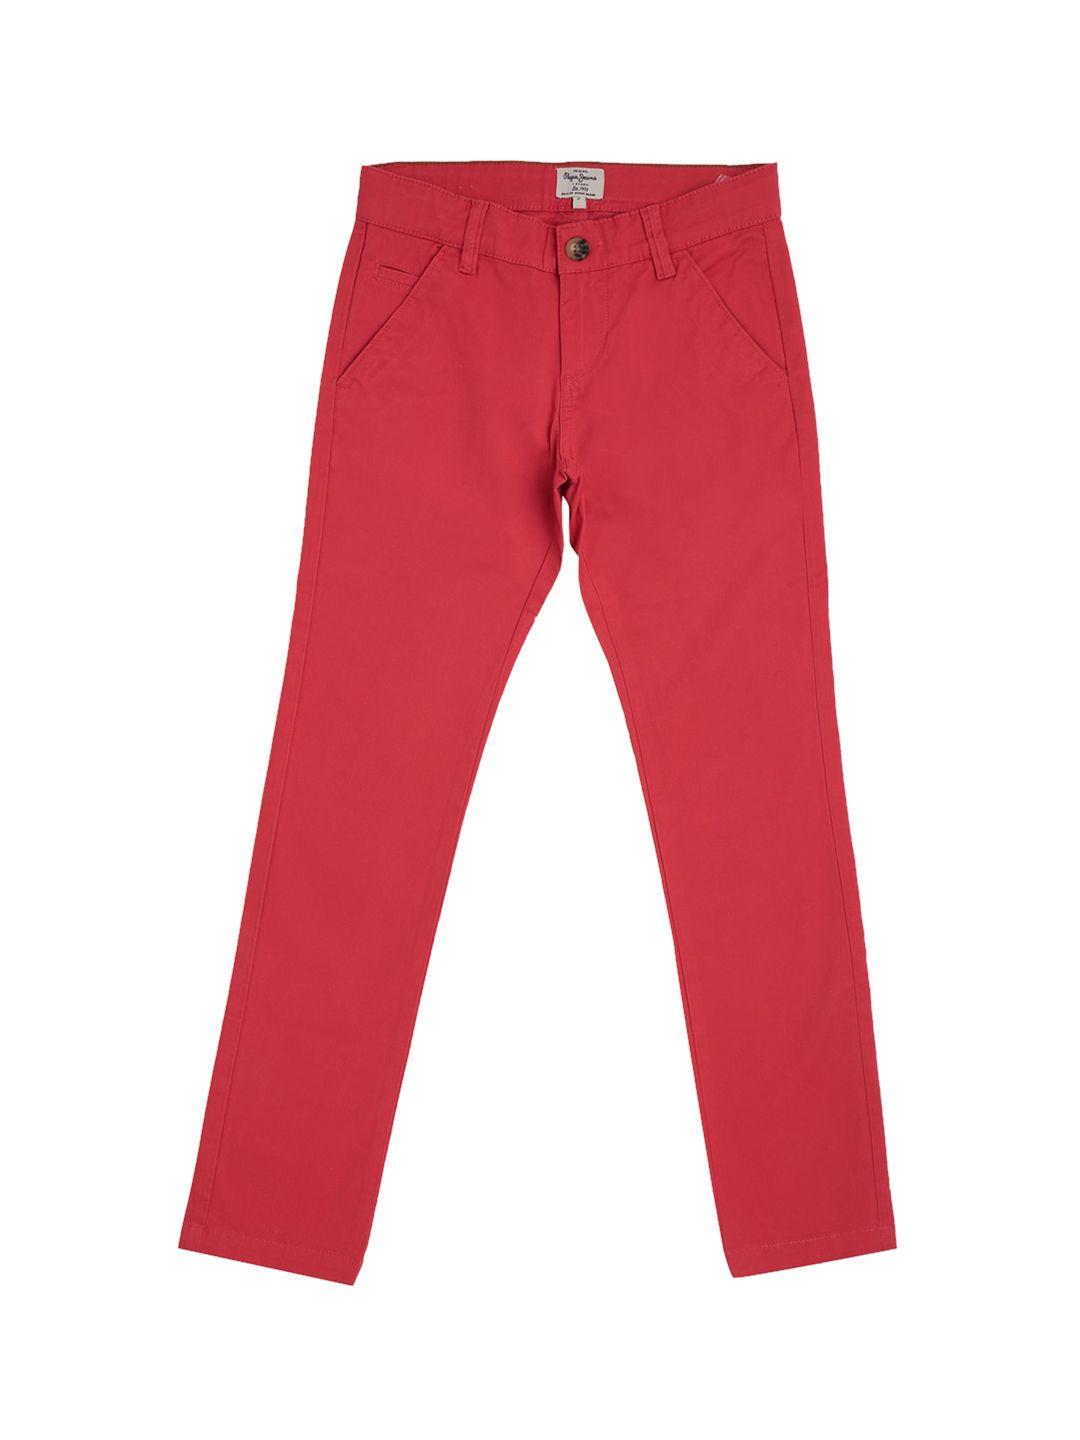 pepe-jeans-boys-red-mid-rise-regular-fit-chinos-trousers